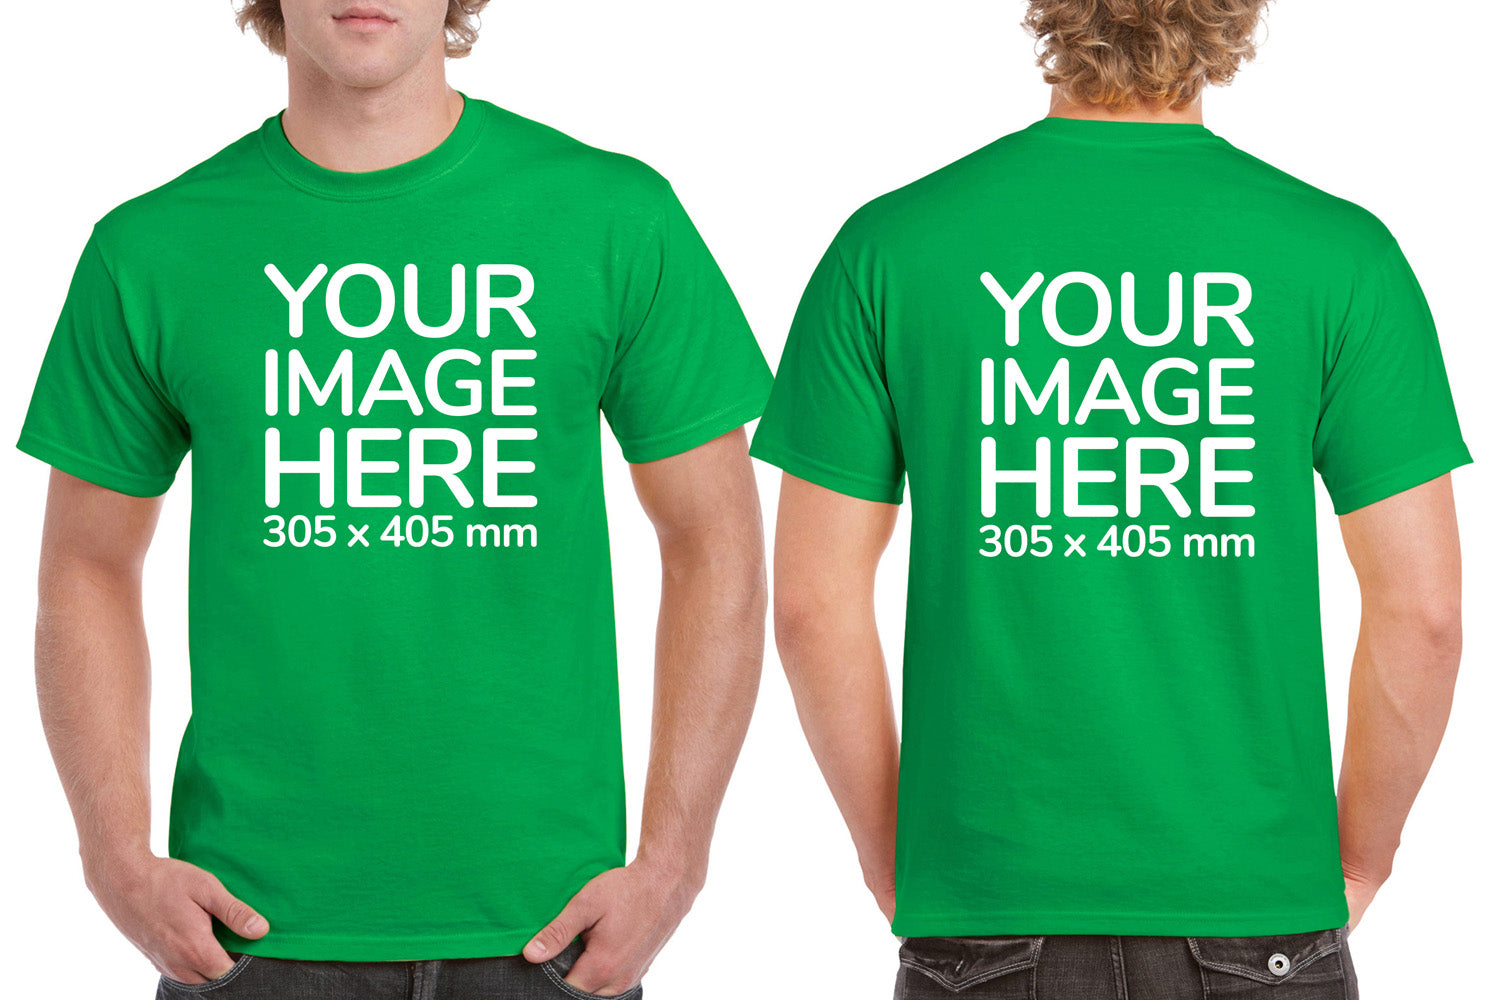 Green Men's T-Shirt - customised with image on front and back